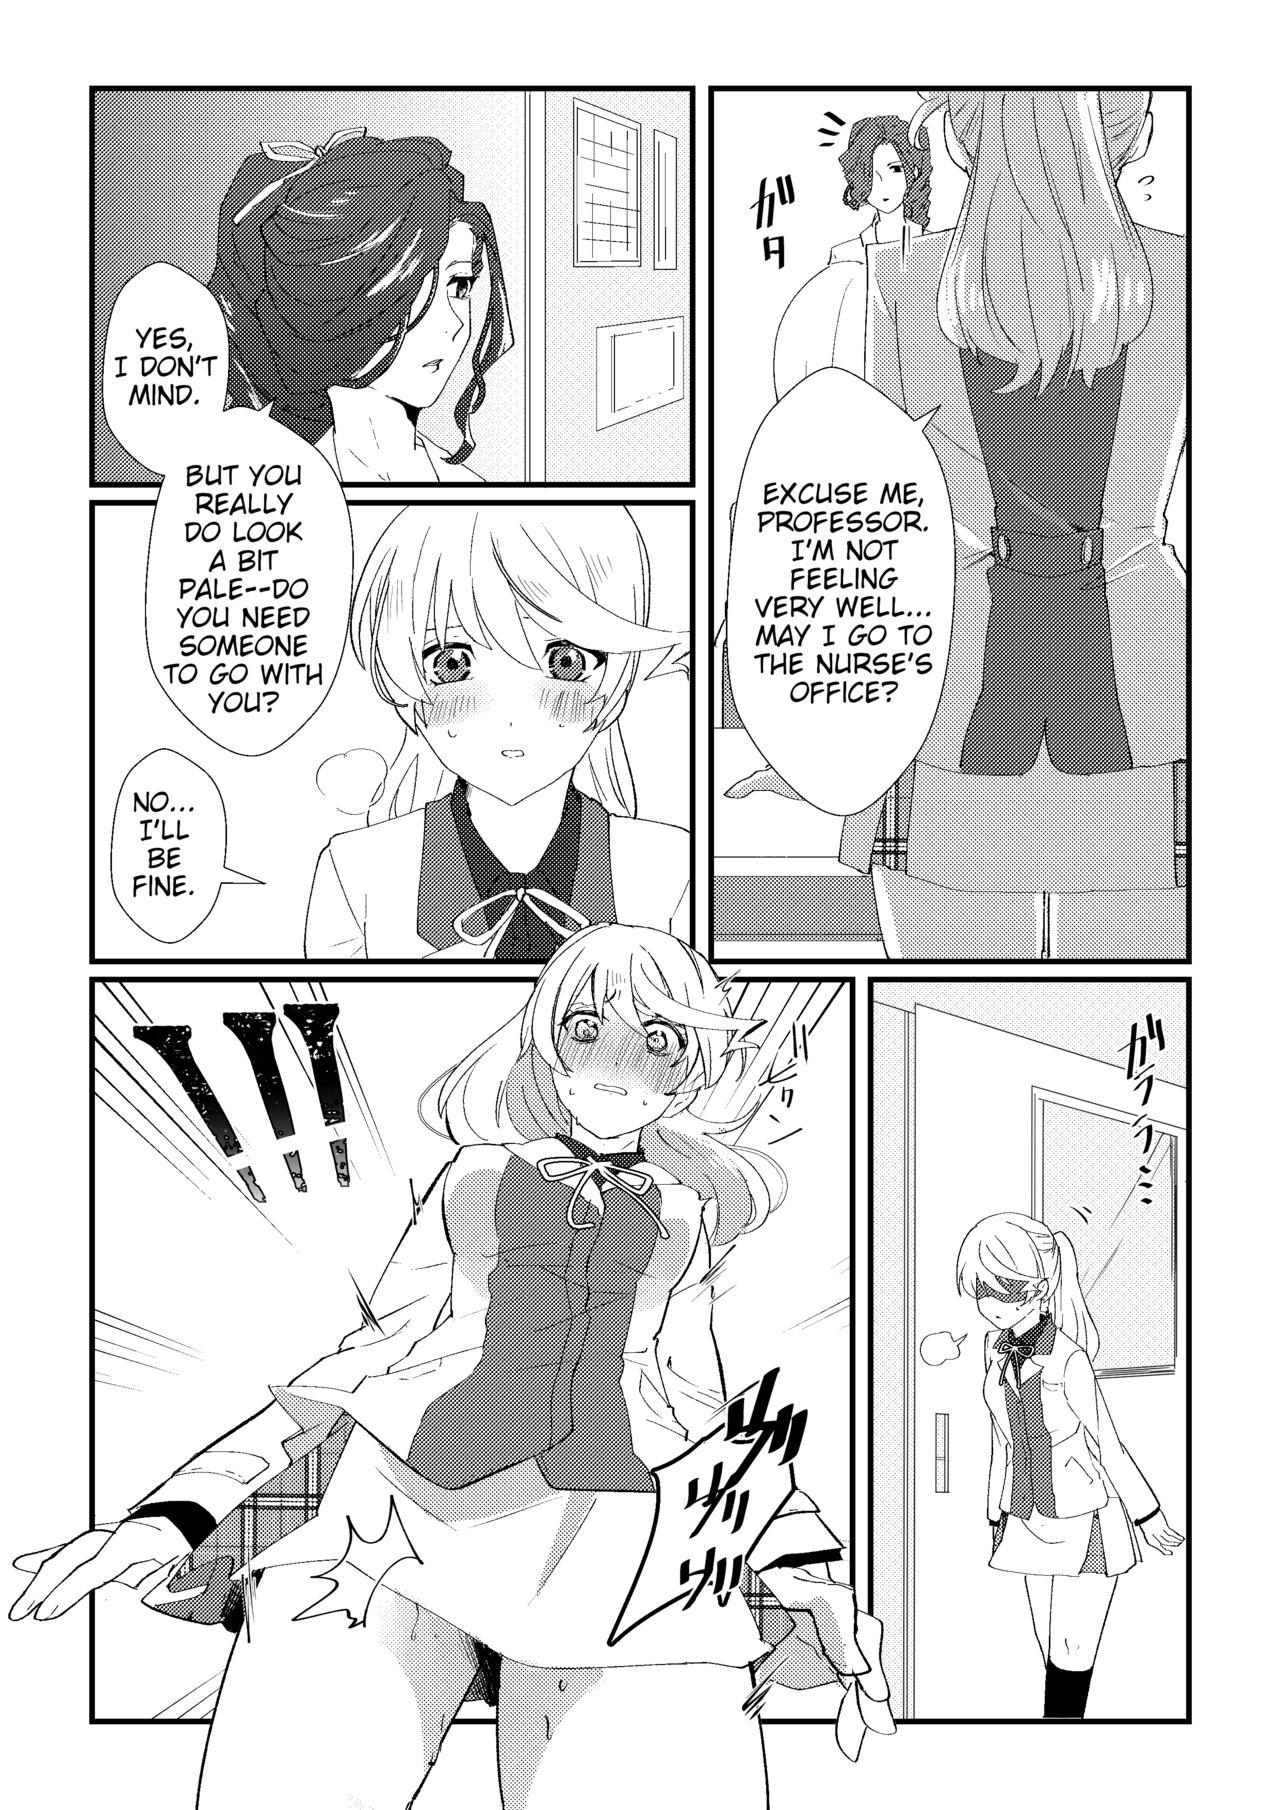 Hole crazy about you - Tales of zestiria Mamada - Page 3